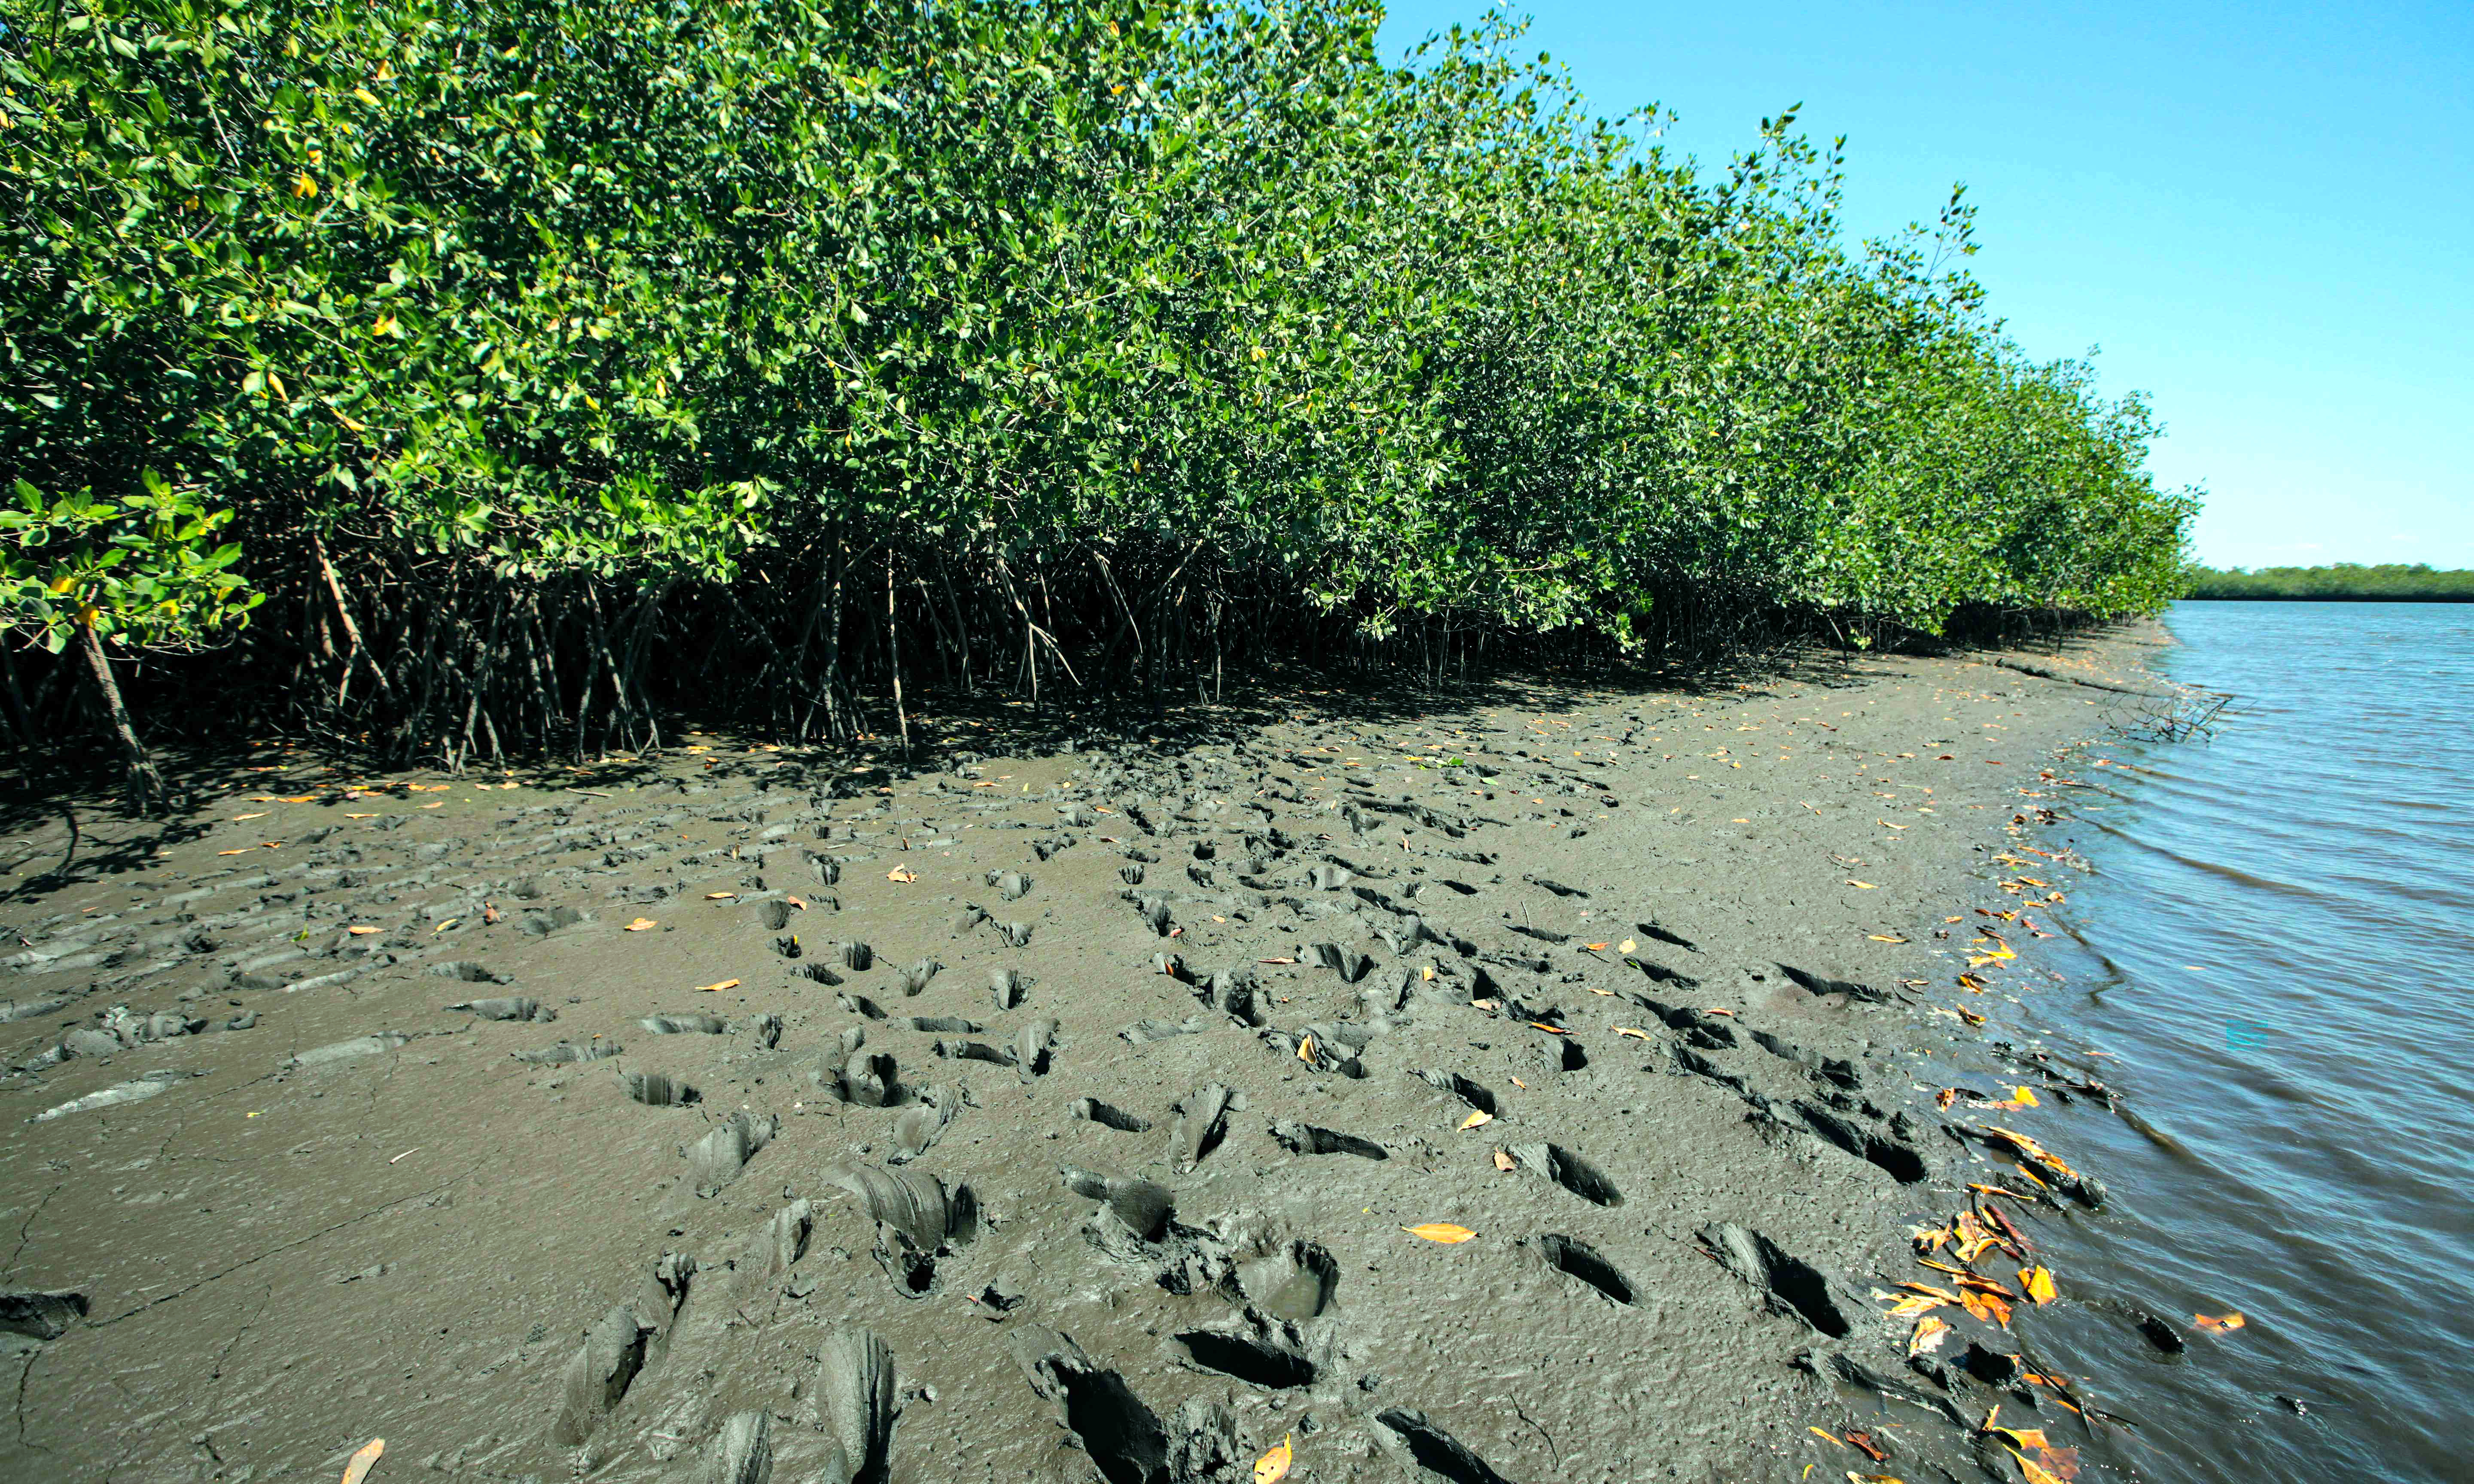 View of footprints of black shell female collectors at a mangrove swamp near the town of Aserradores, Pacific Coast of Nicaragua.